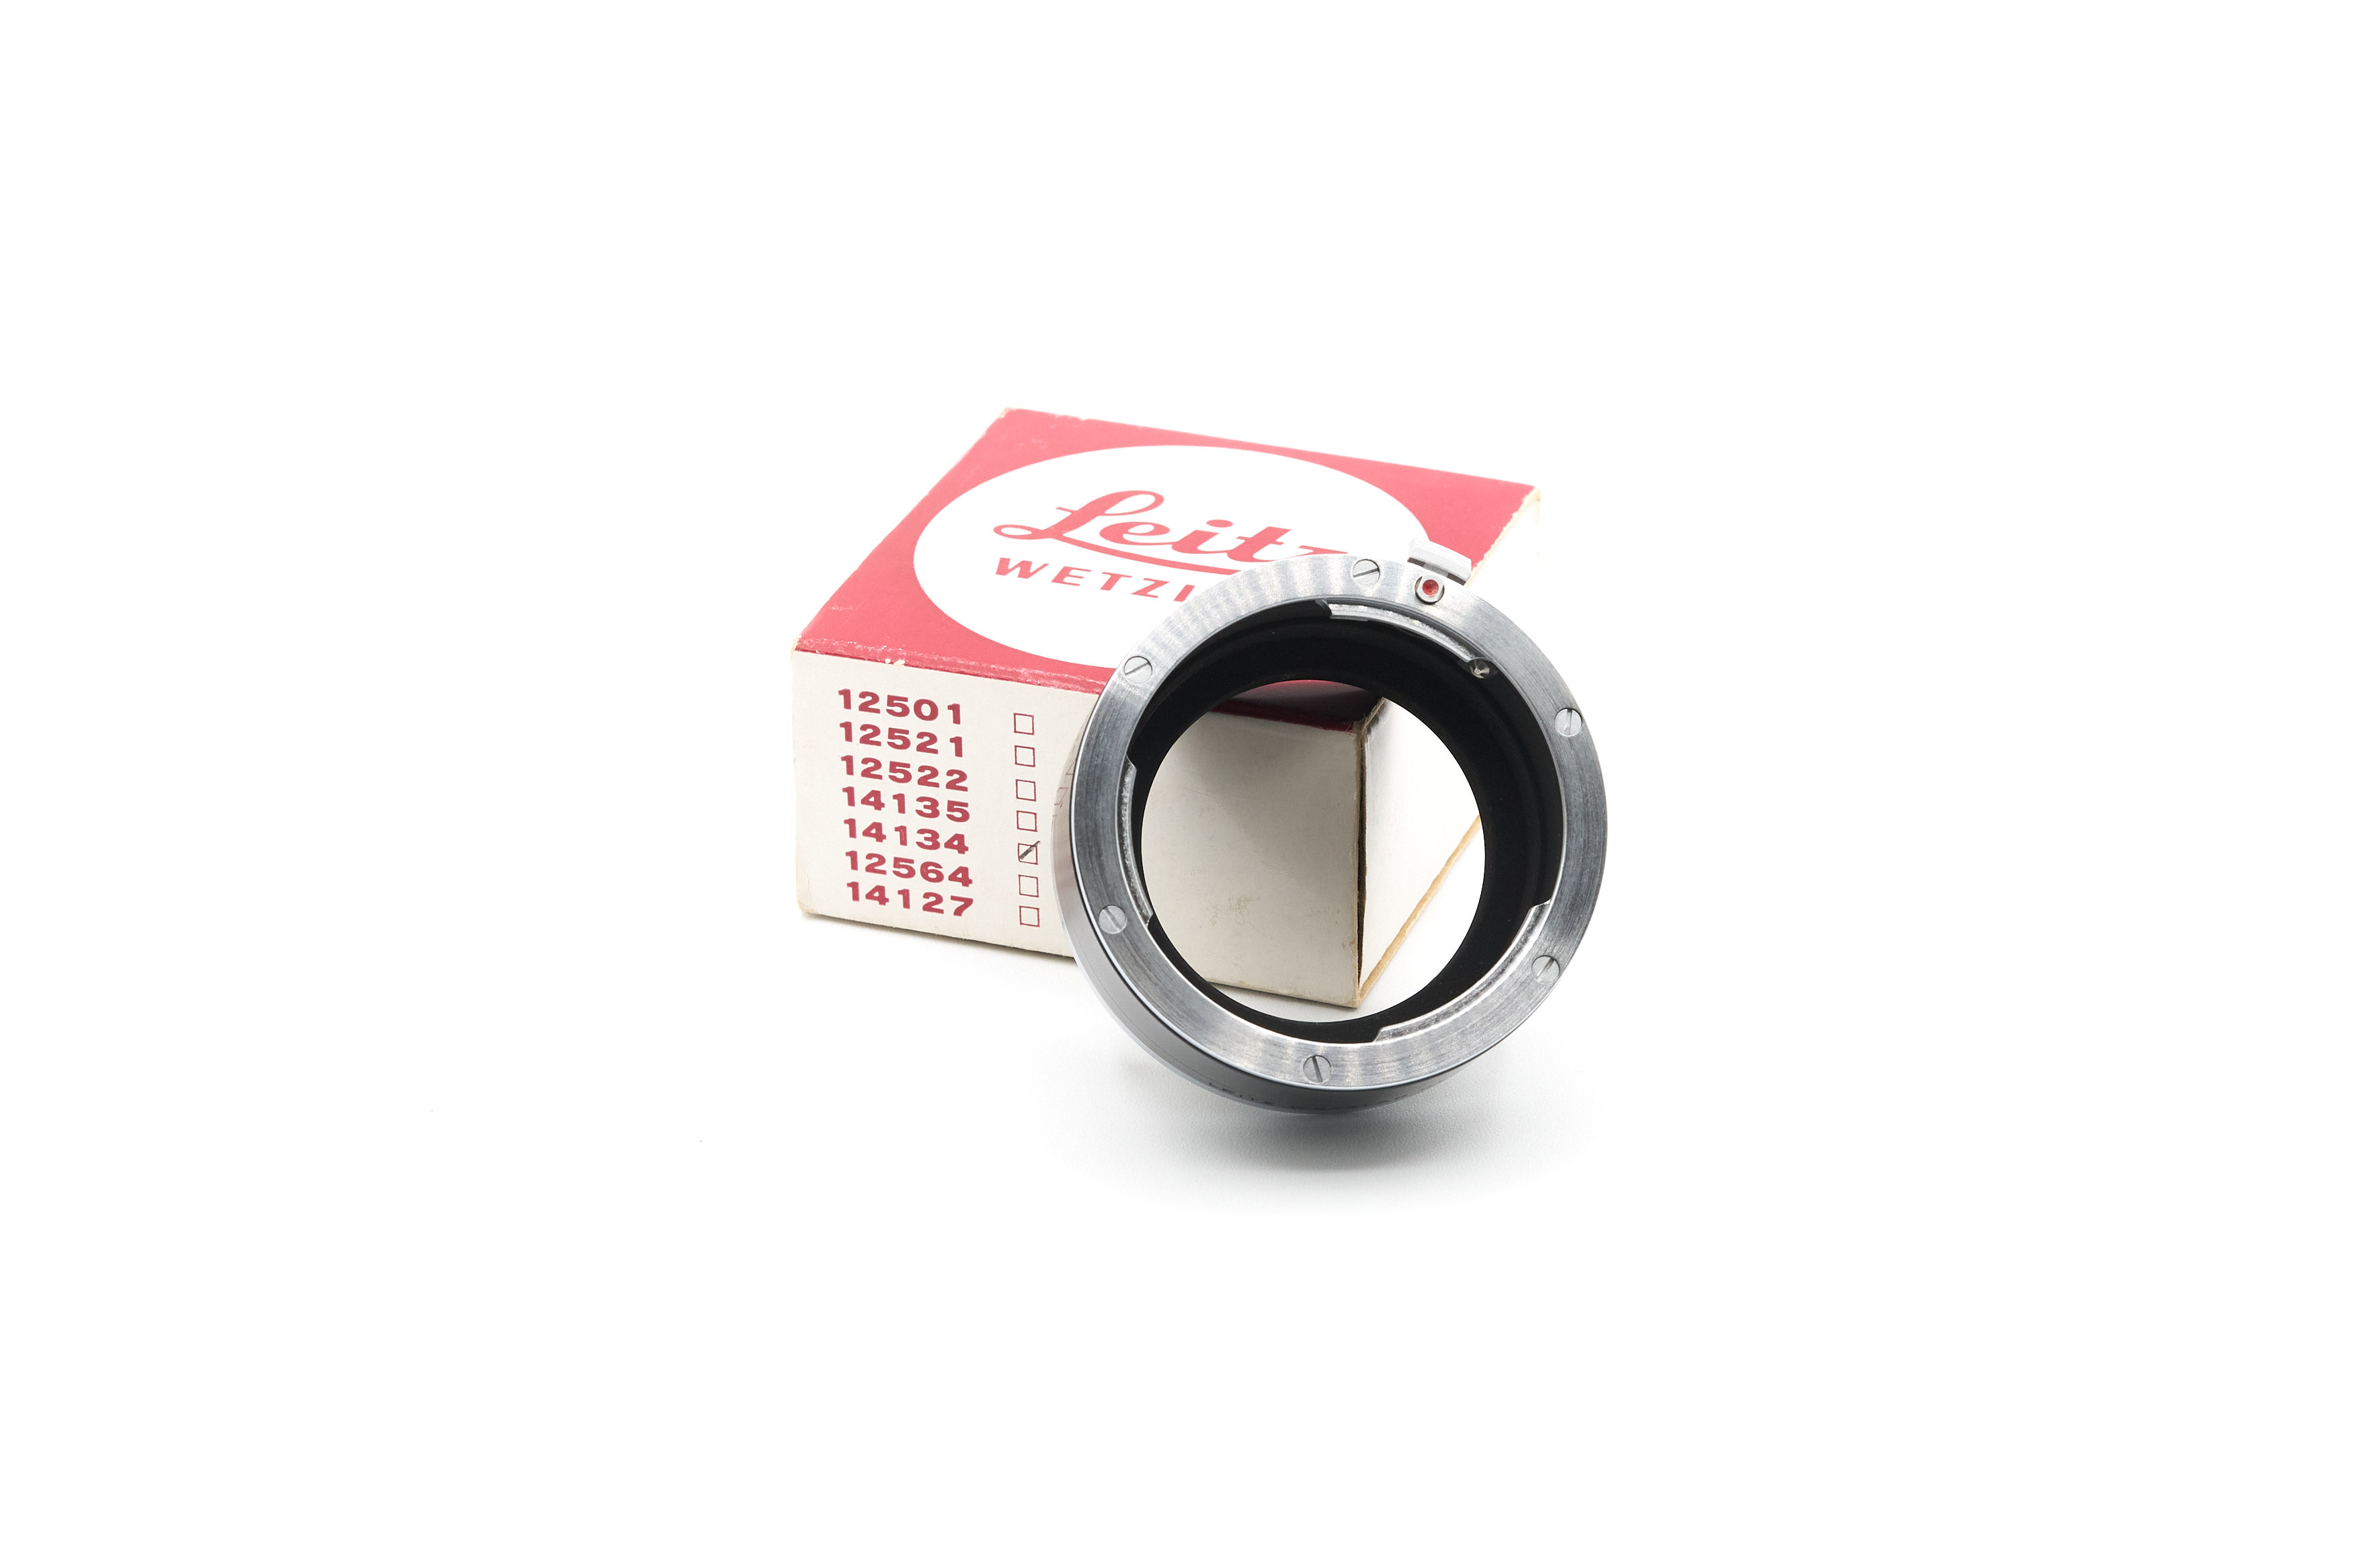 Leica 14134 Macro Adapter and Leica extending ring 14135